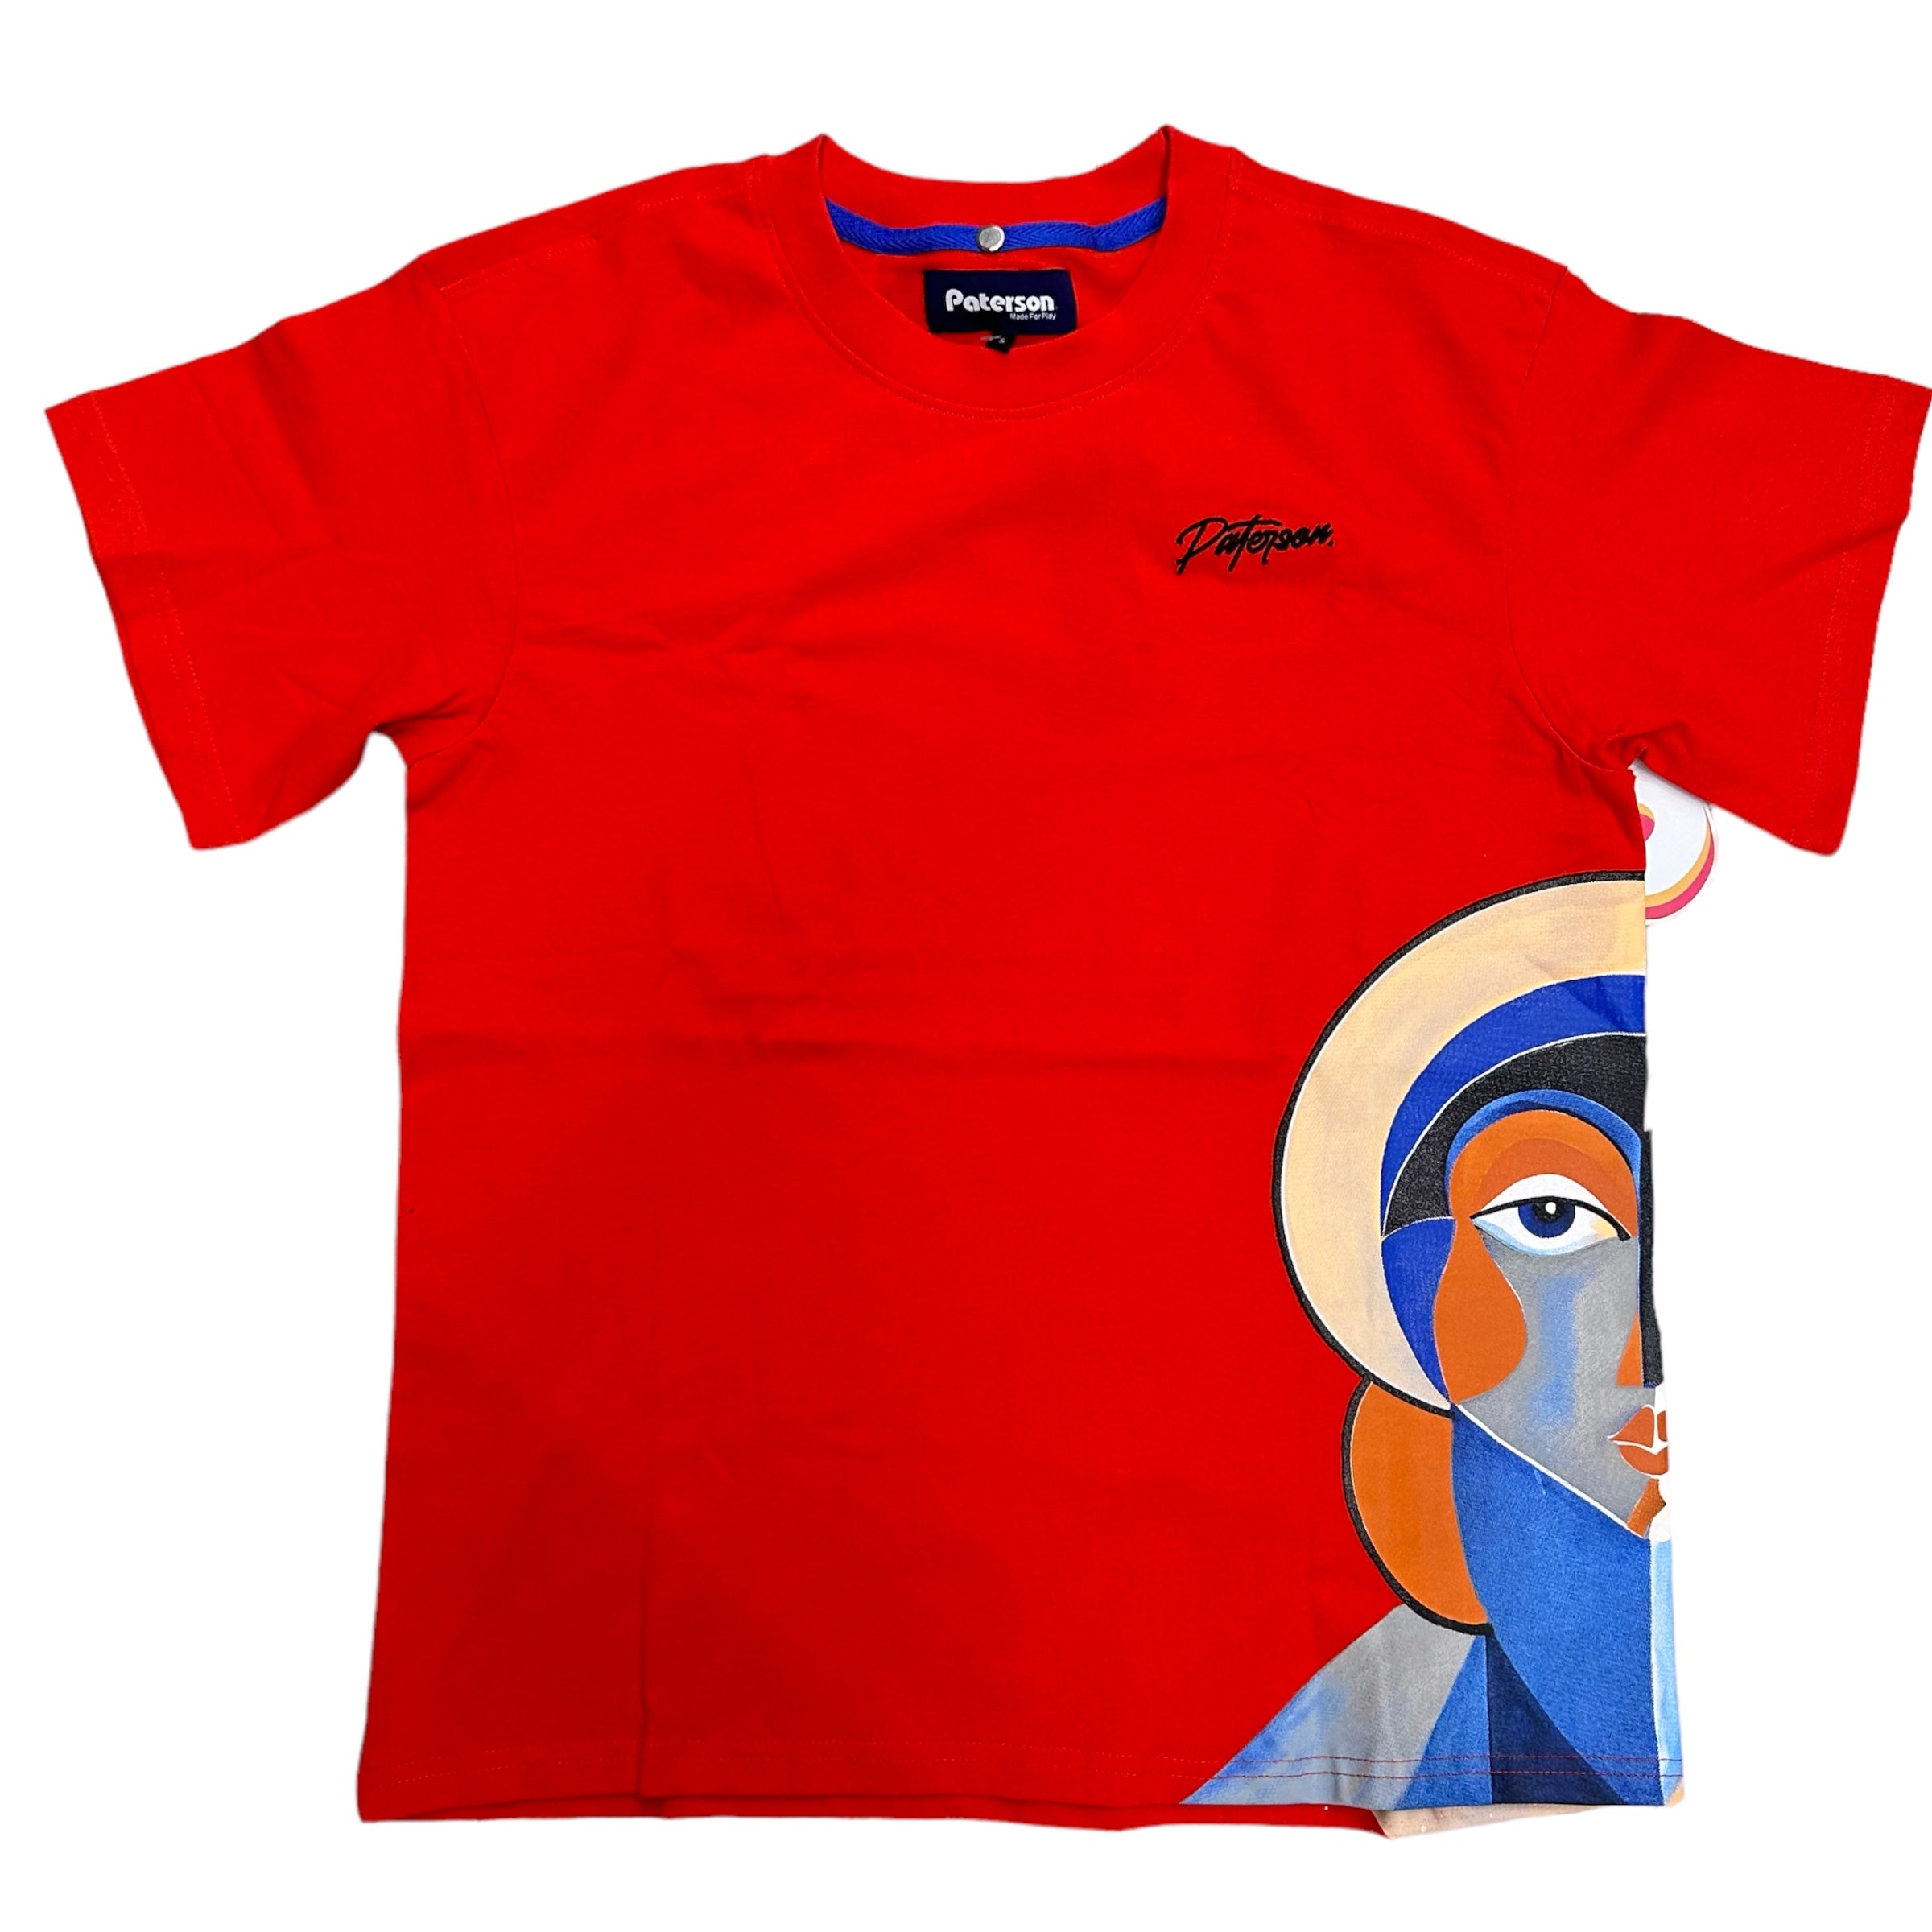 Paterson Face  t shirt Red  p54